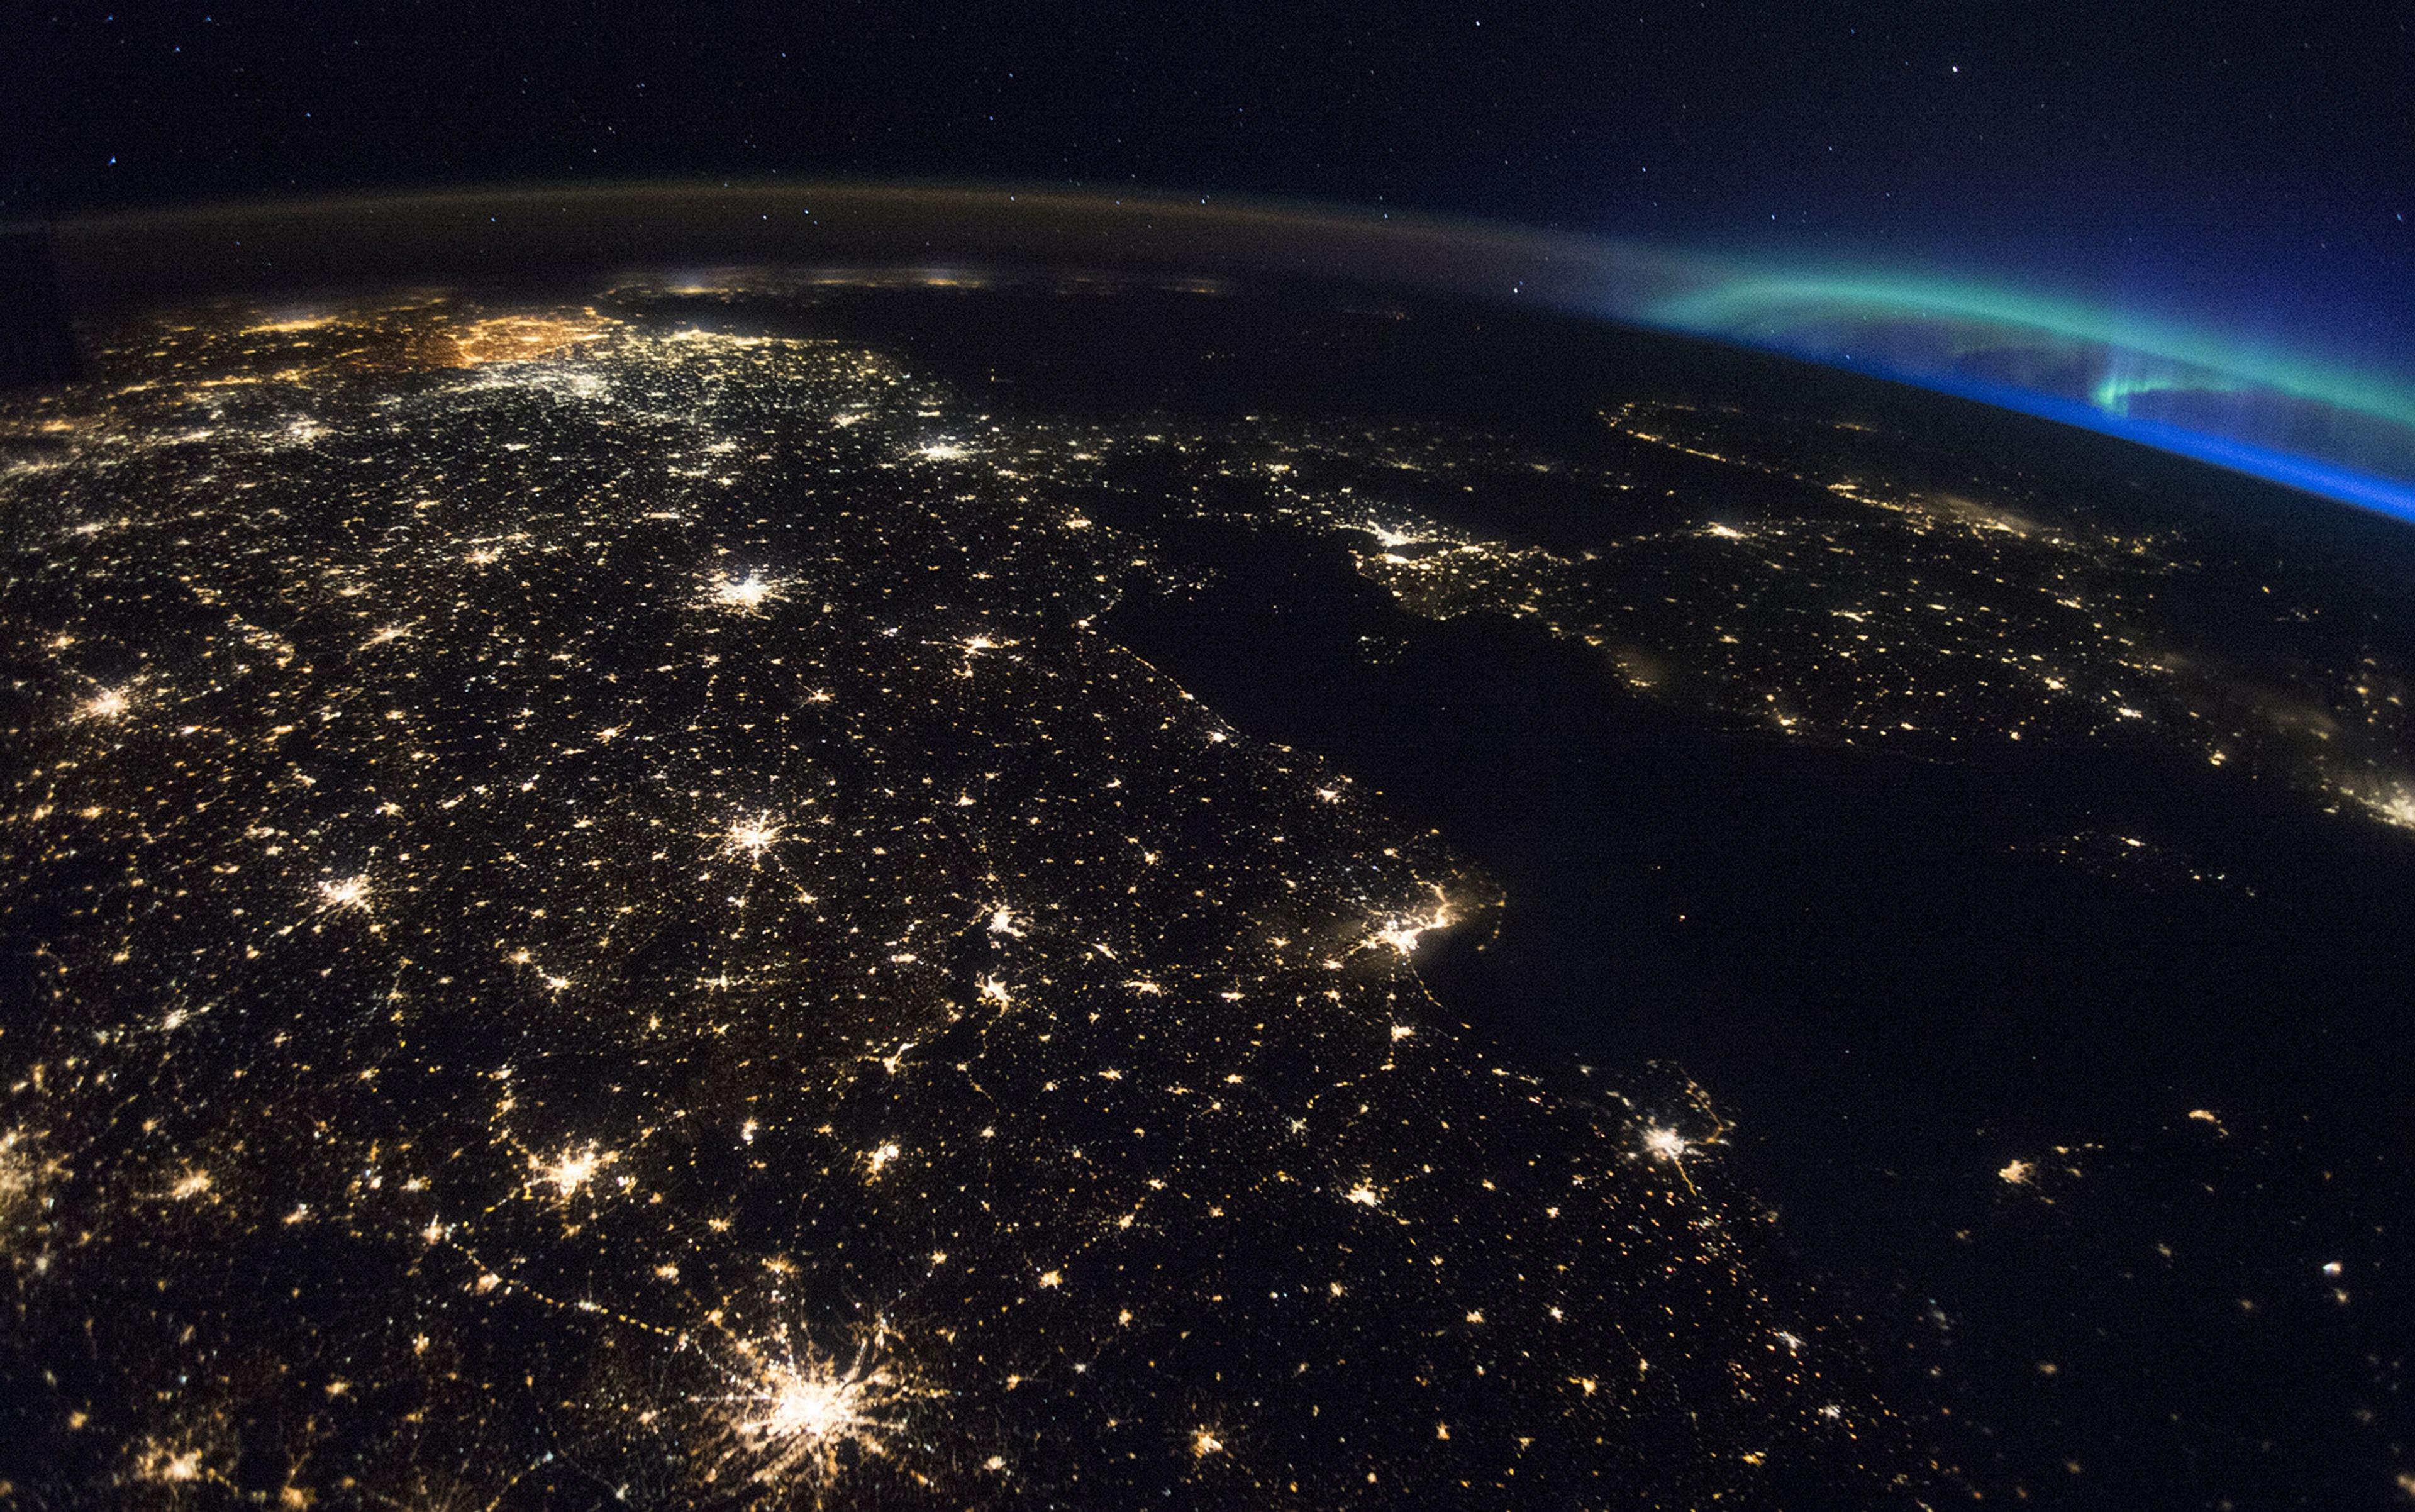 View from space of Europe at night, showing bright city lights and the Northern Lights in the distance. The image features a clear outline of countries and coastlines illuminated by artificial light, with a dark sky speckled with stars overhead.